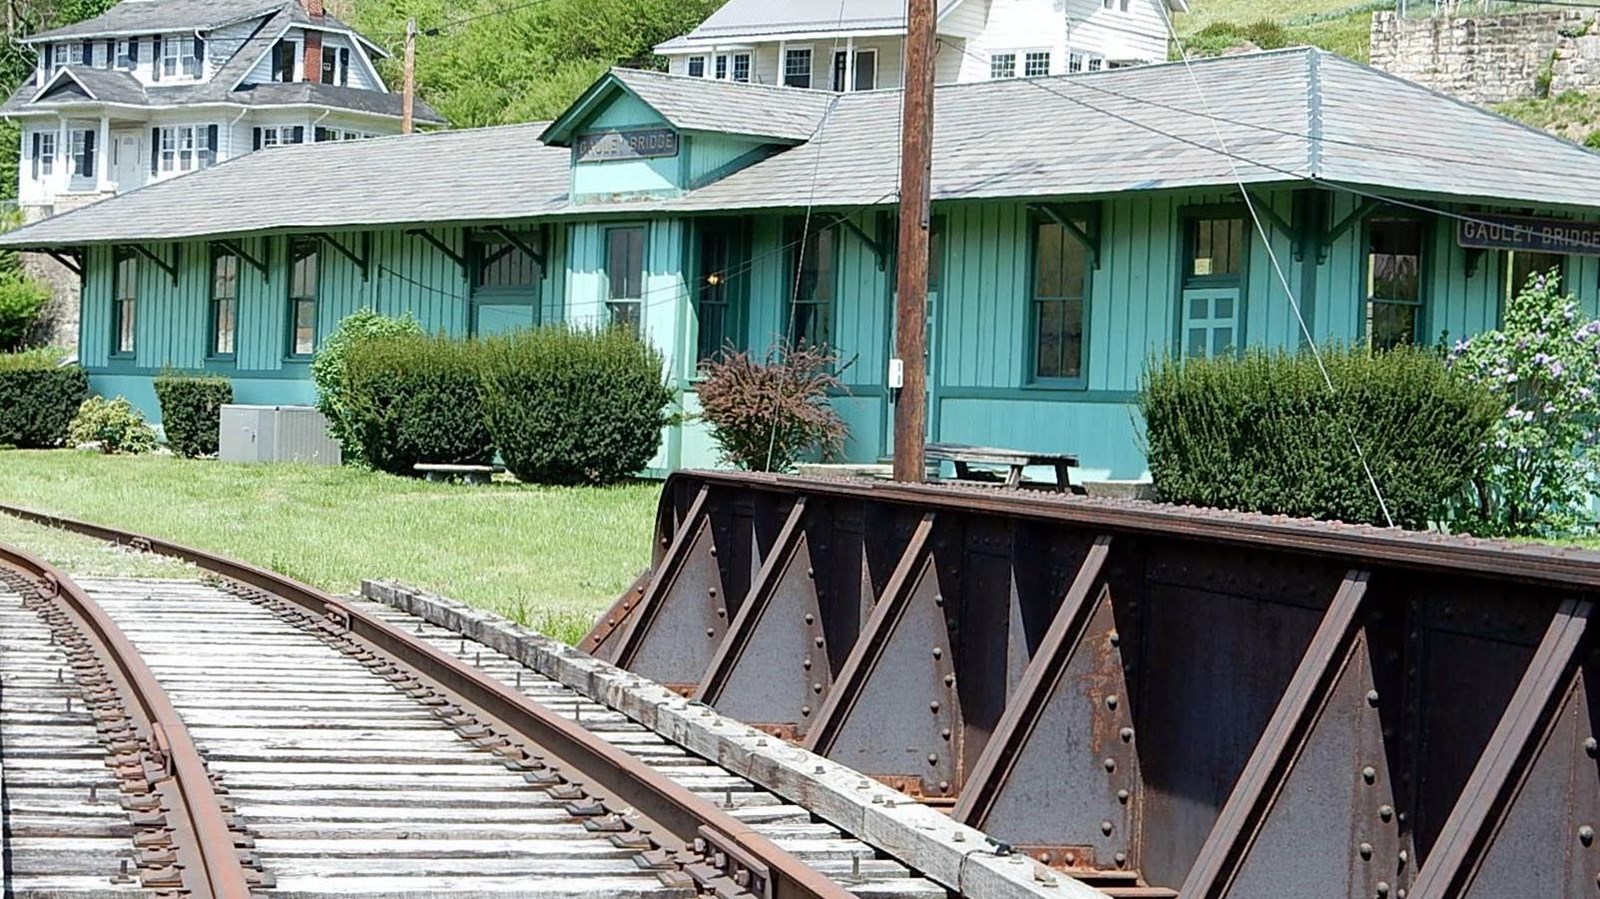 A green railroad depot with tracks in front